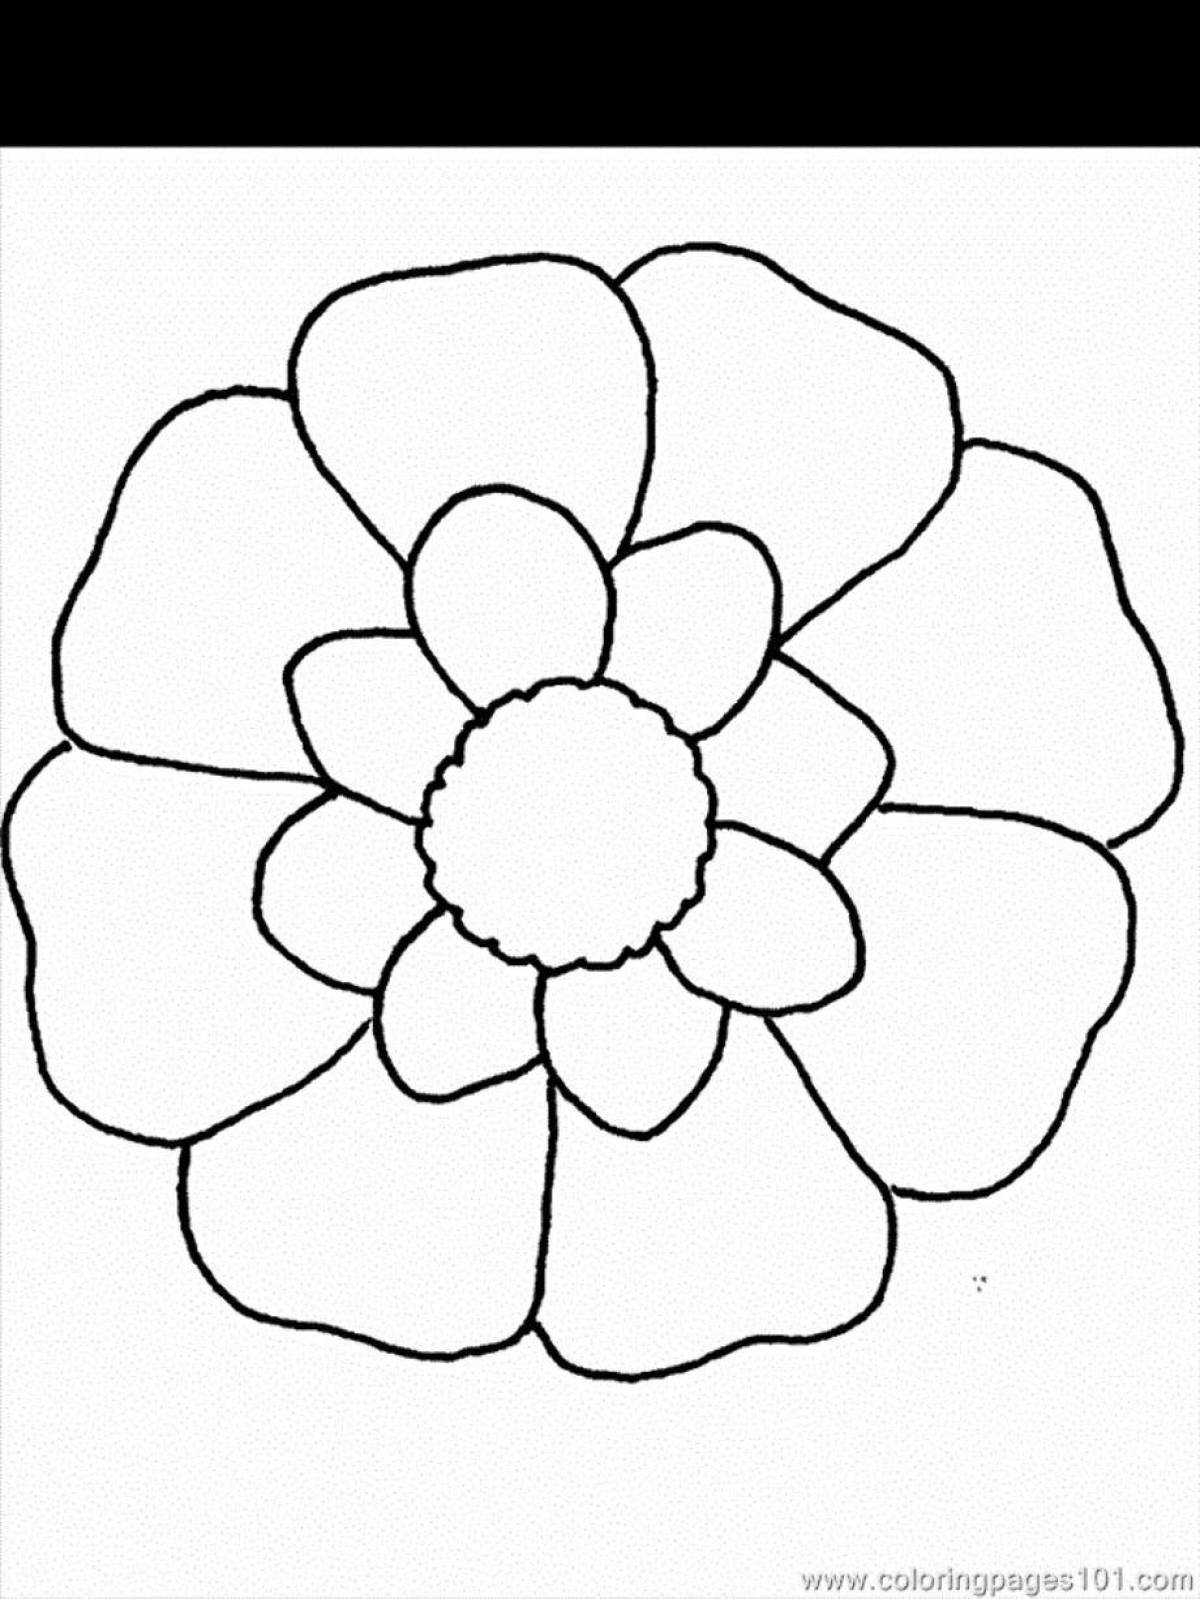 Shiny simple flower coloring